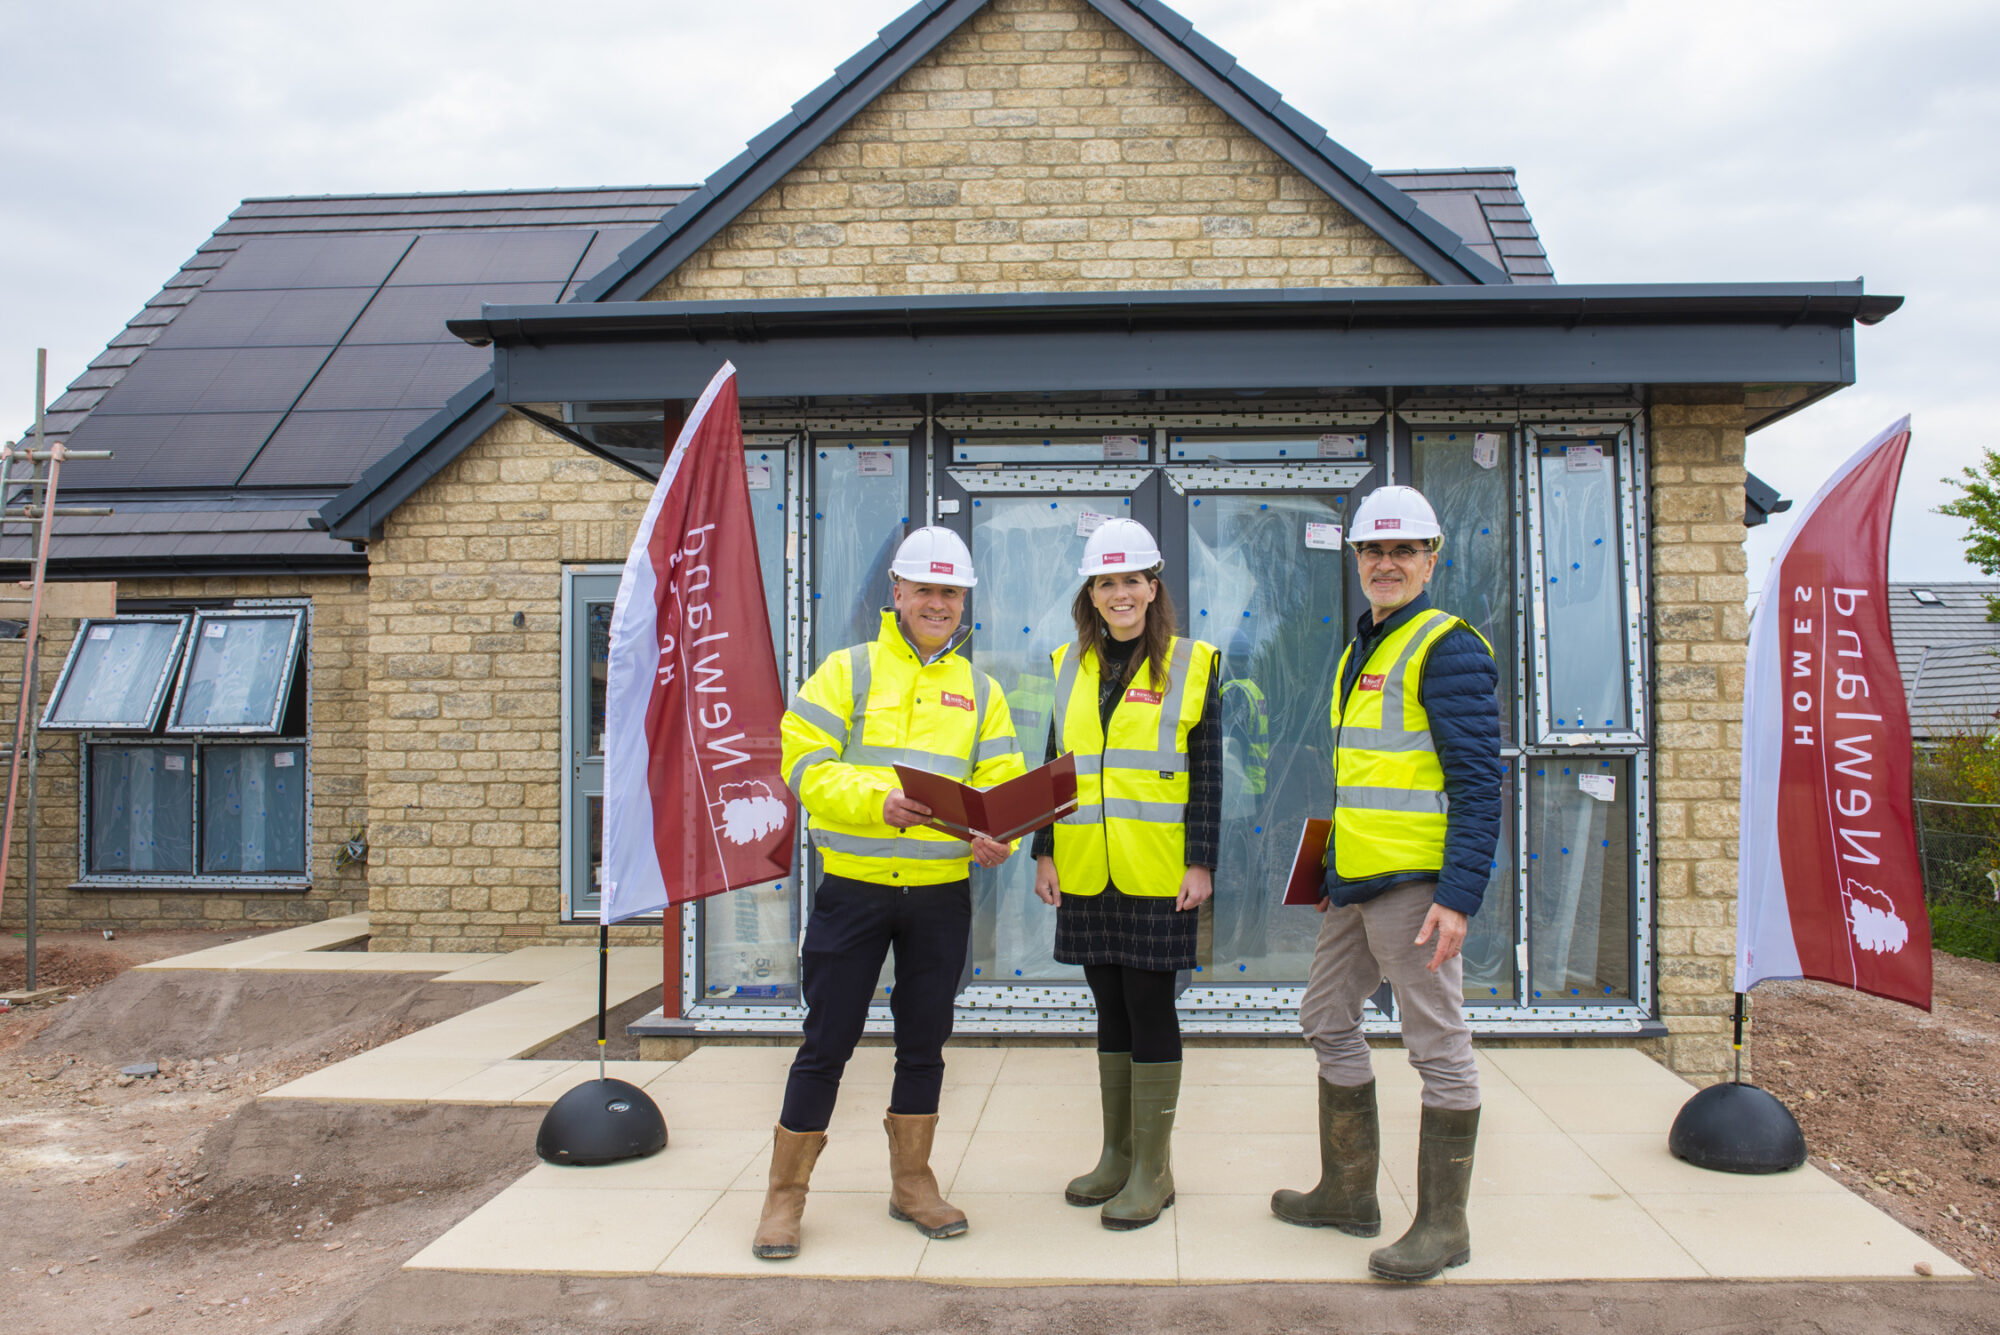 We welcomed the MP for Chippenham, the Rt Hon Michelle Donelan MP, for a hard hat tour of its revolutionary collection of zero carbon homes in Semington